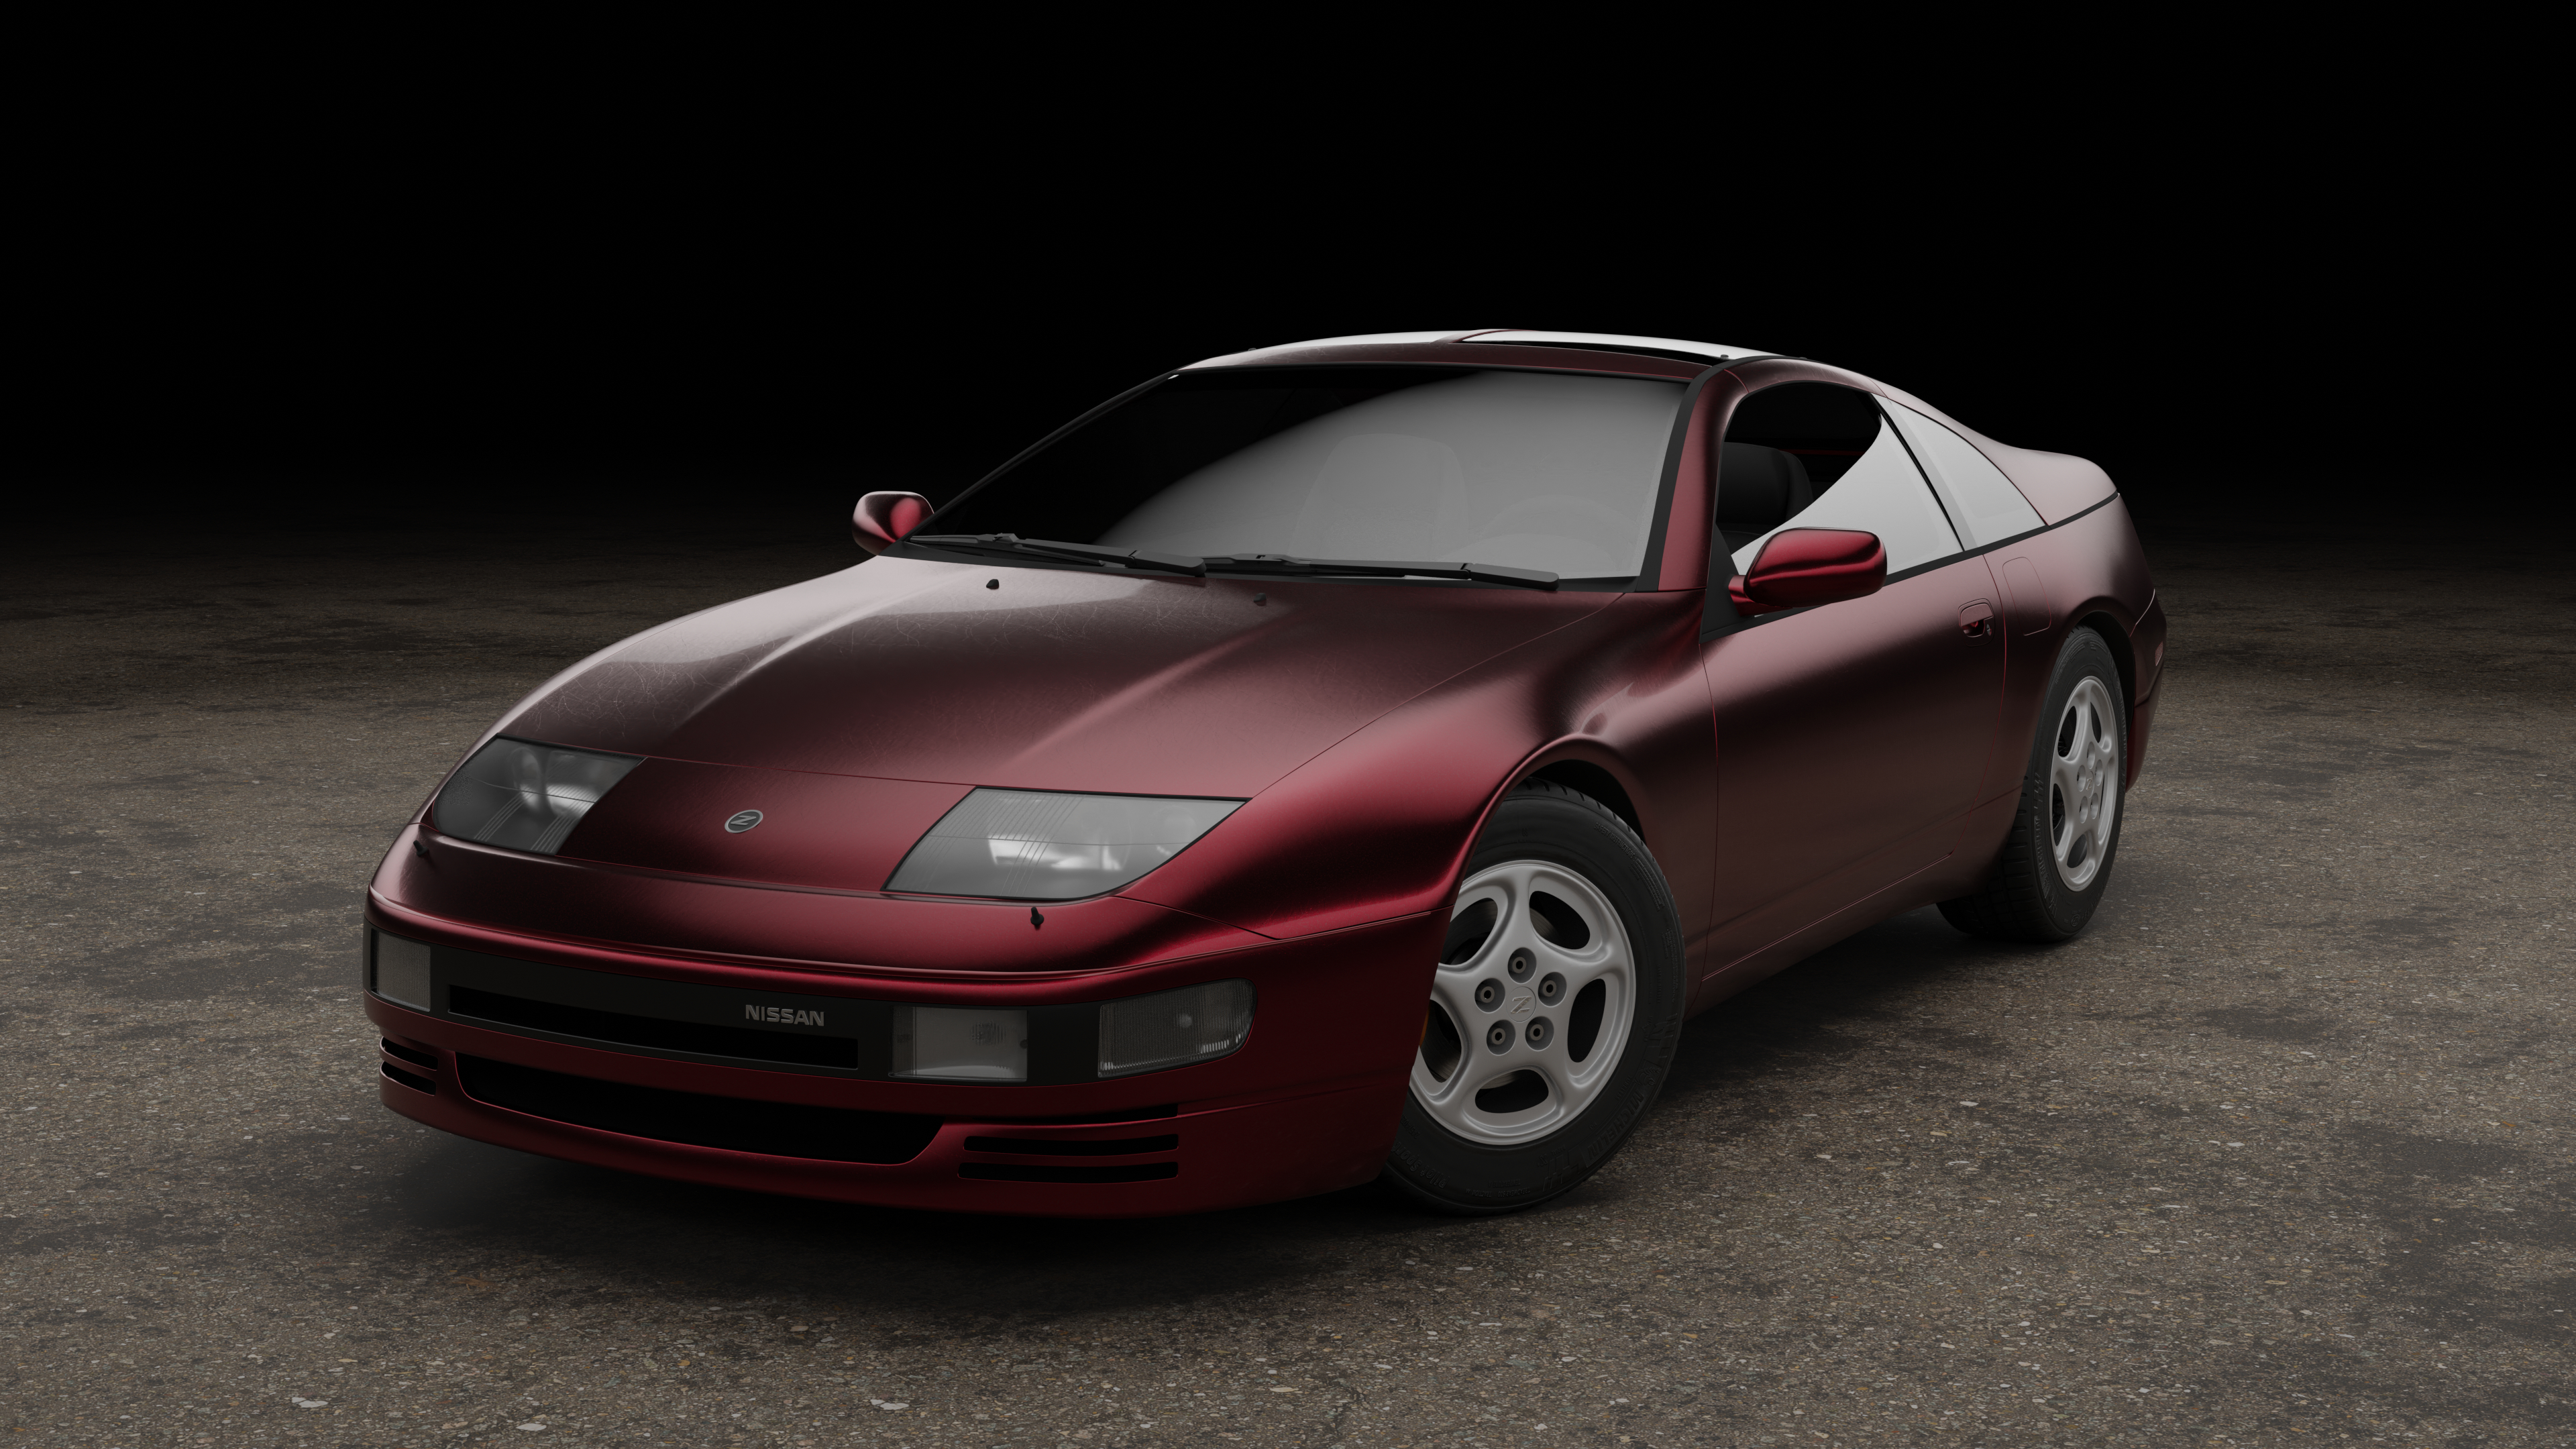 3840x2160 Just finished my last project, Nissan 300ZX (Z32) : r/blender